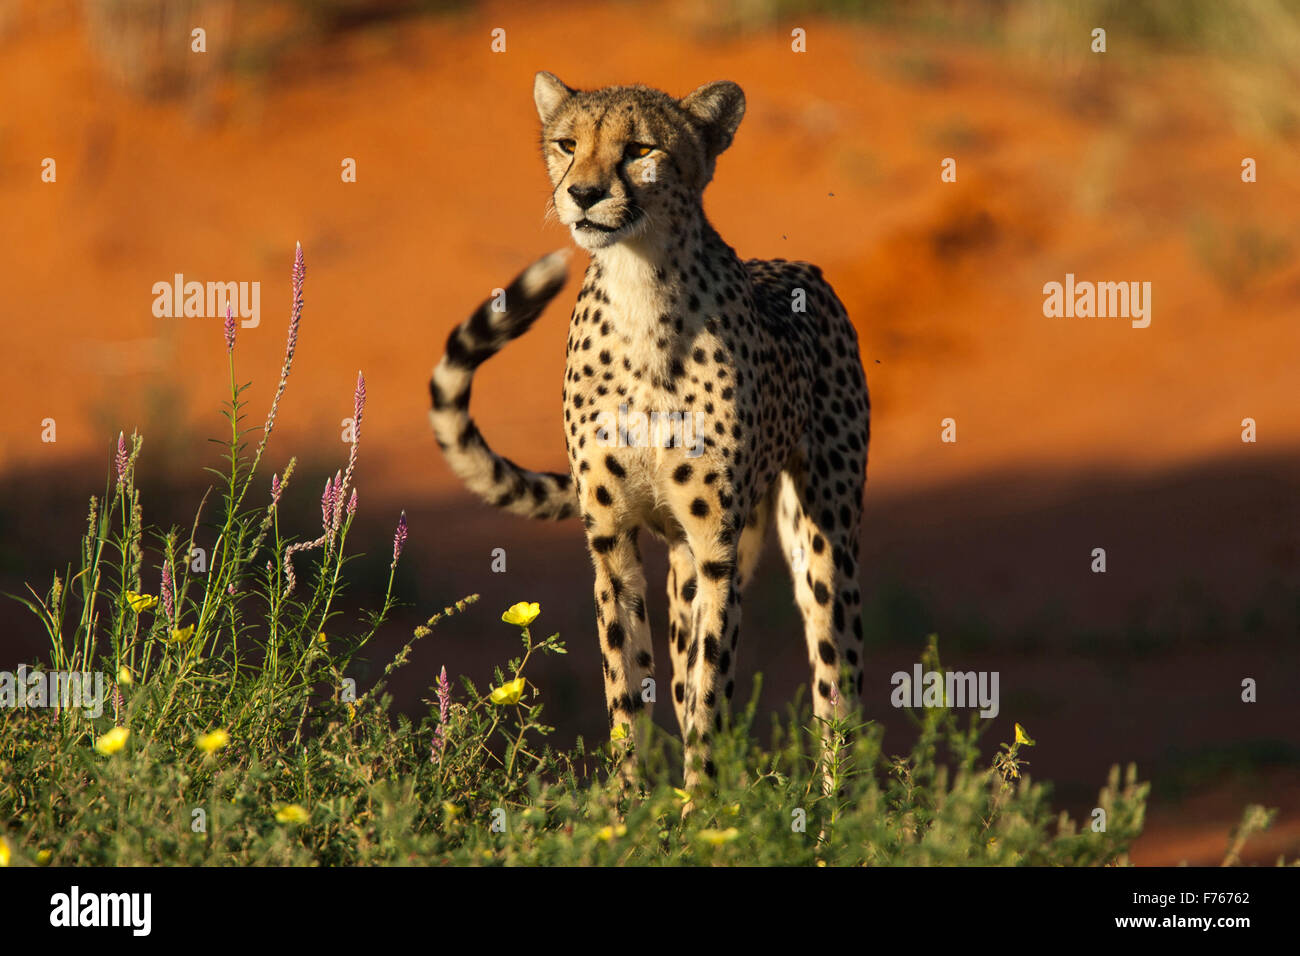 Eye level of a cheetah watching something in the Kgalagadi Transfrontier Park with wild flowers in the foreground Stock Photo